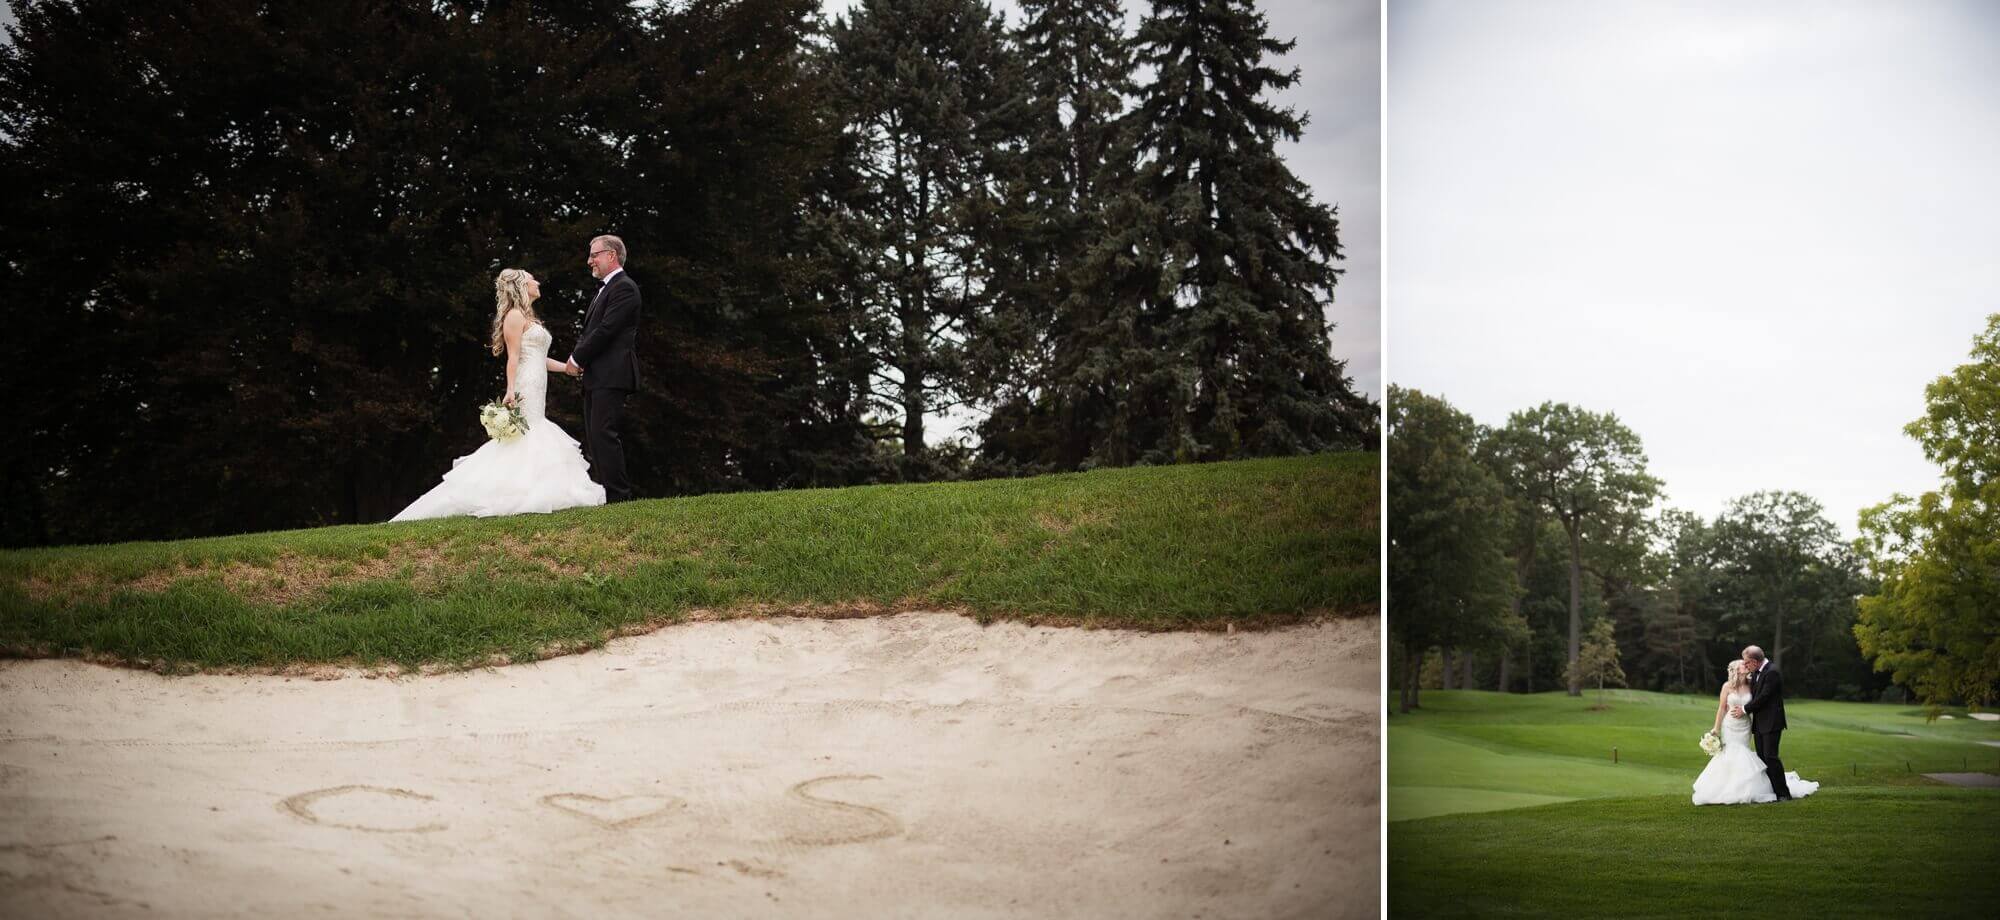 The bride and grooms initials written in the sand at Lambton Golf & Country Club